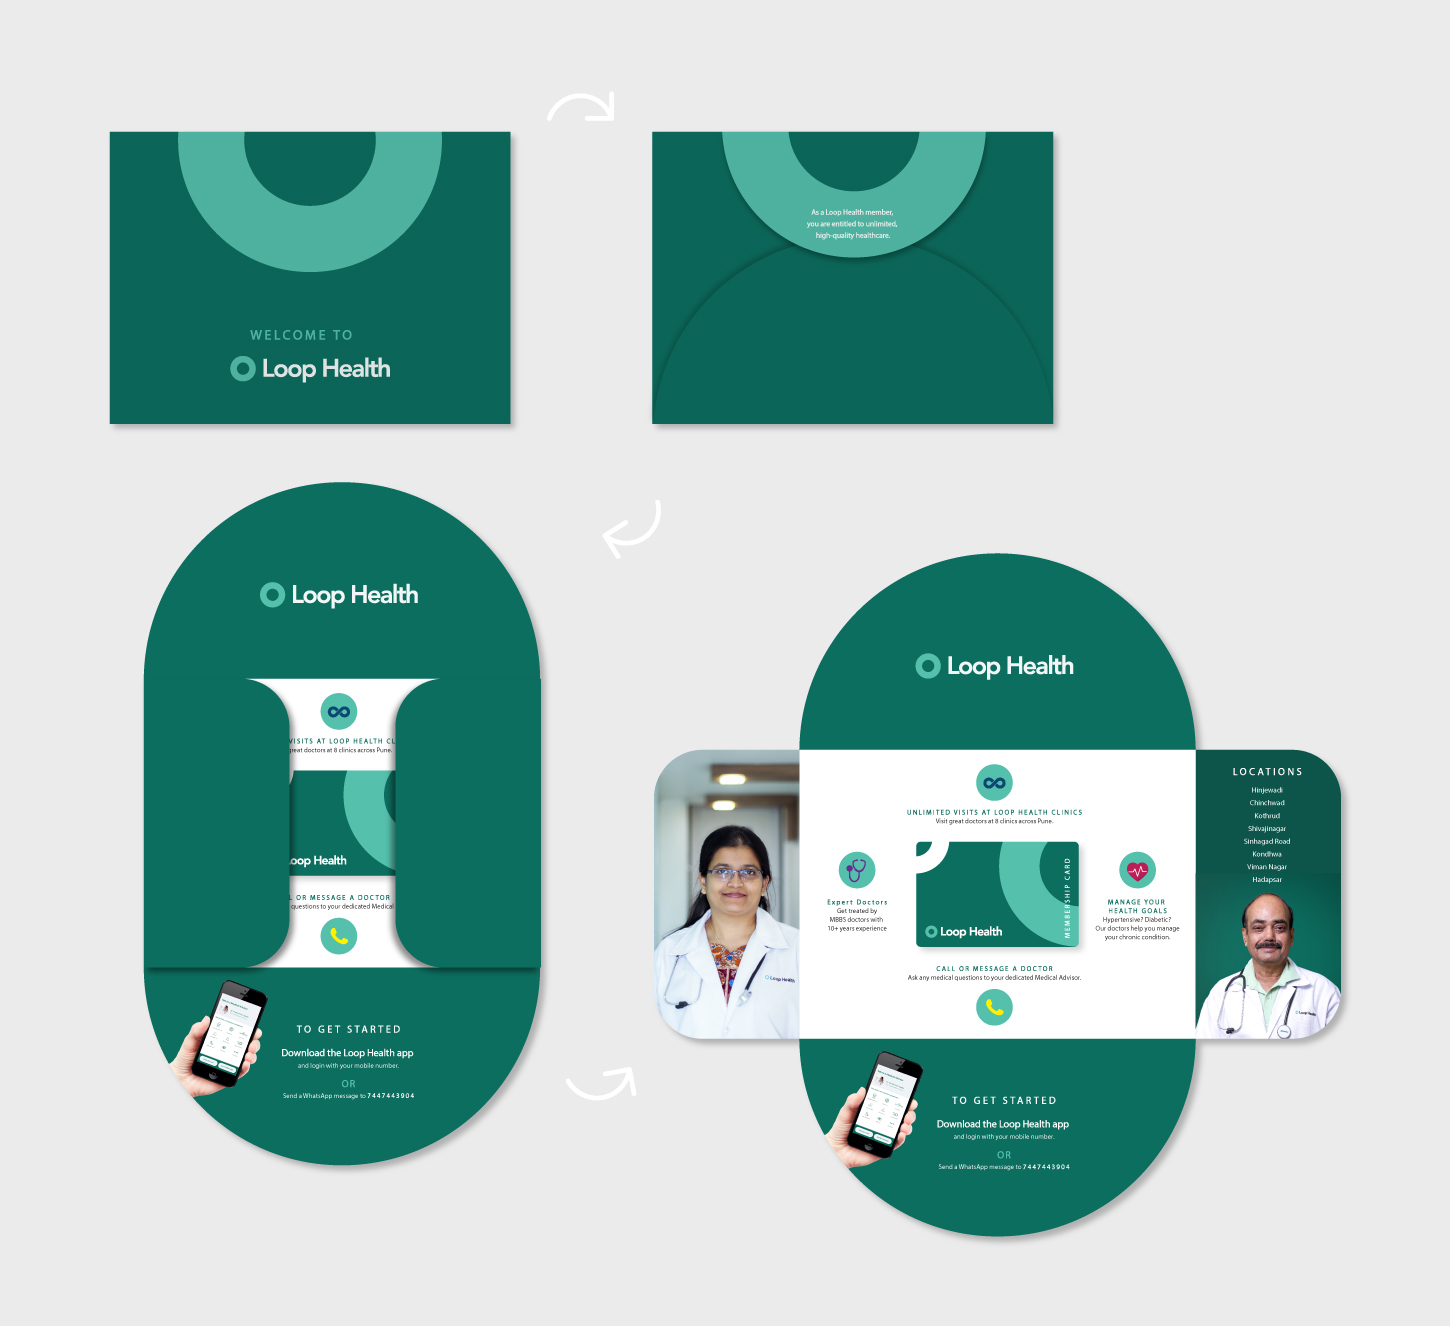 Welcome Kit Design for Loop Health